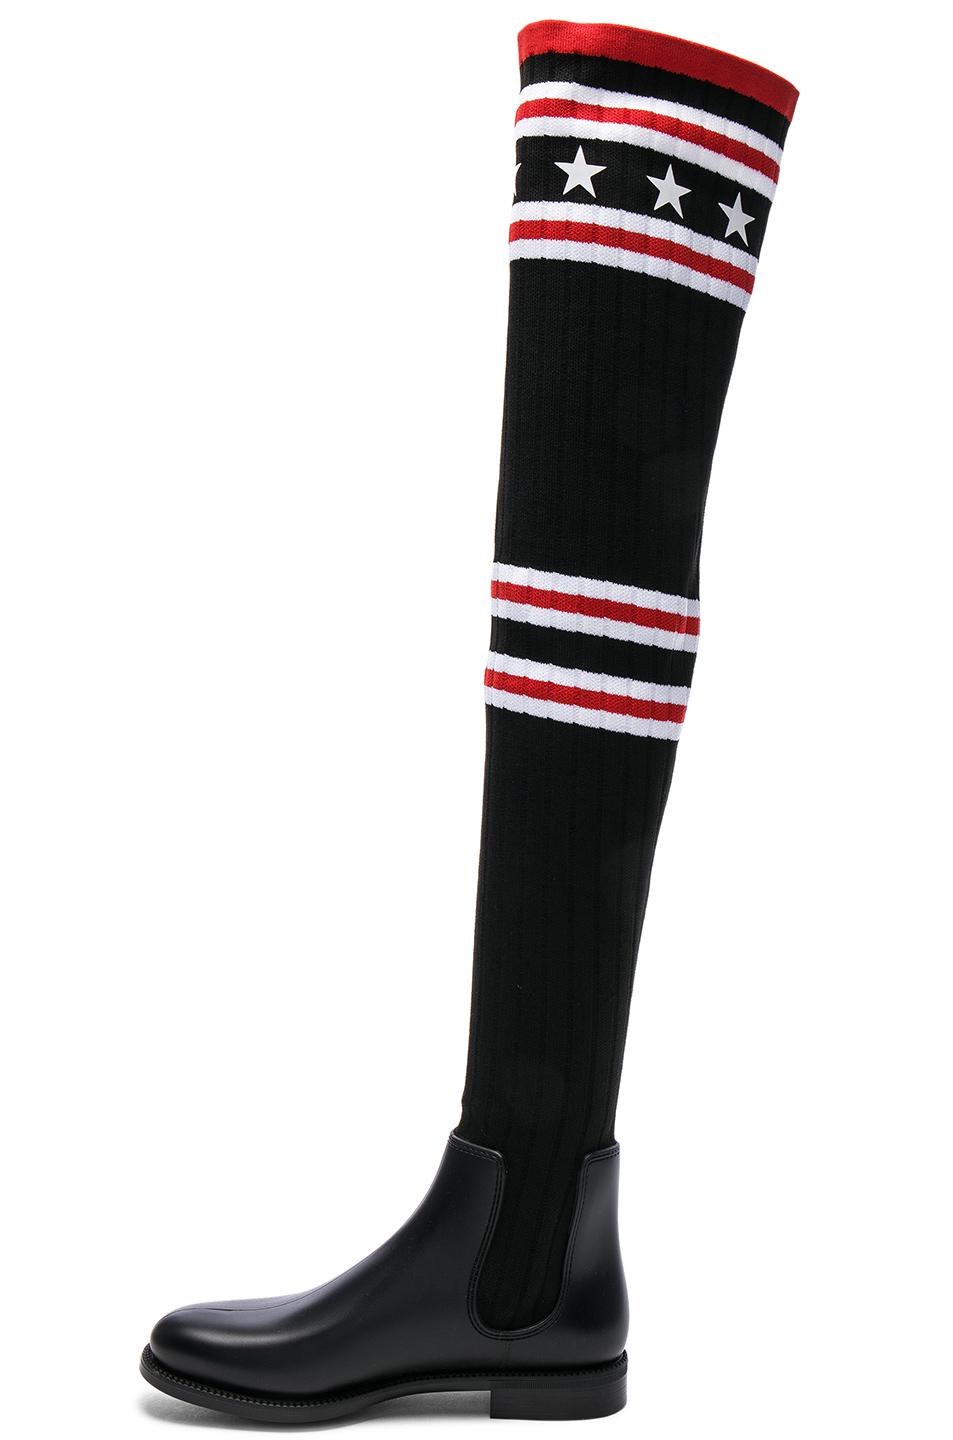 Lyst - Givenchy Rib Knit Over The Knee Sock Boots in Black